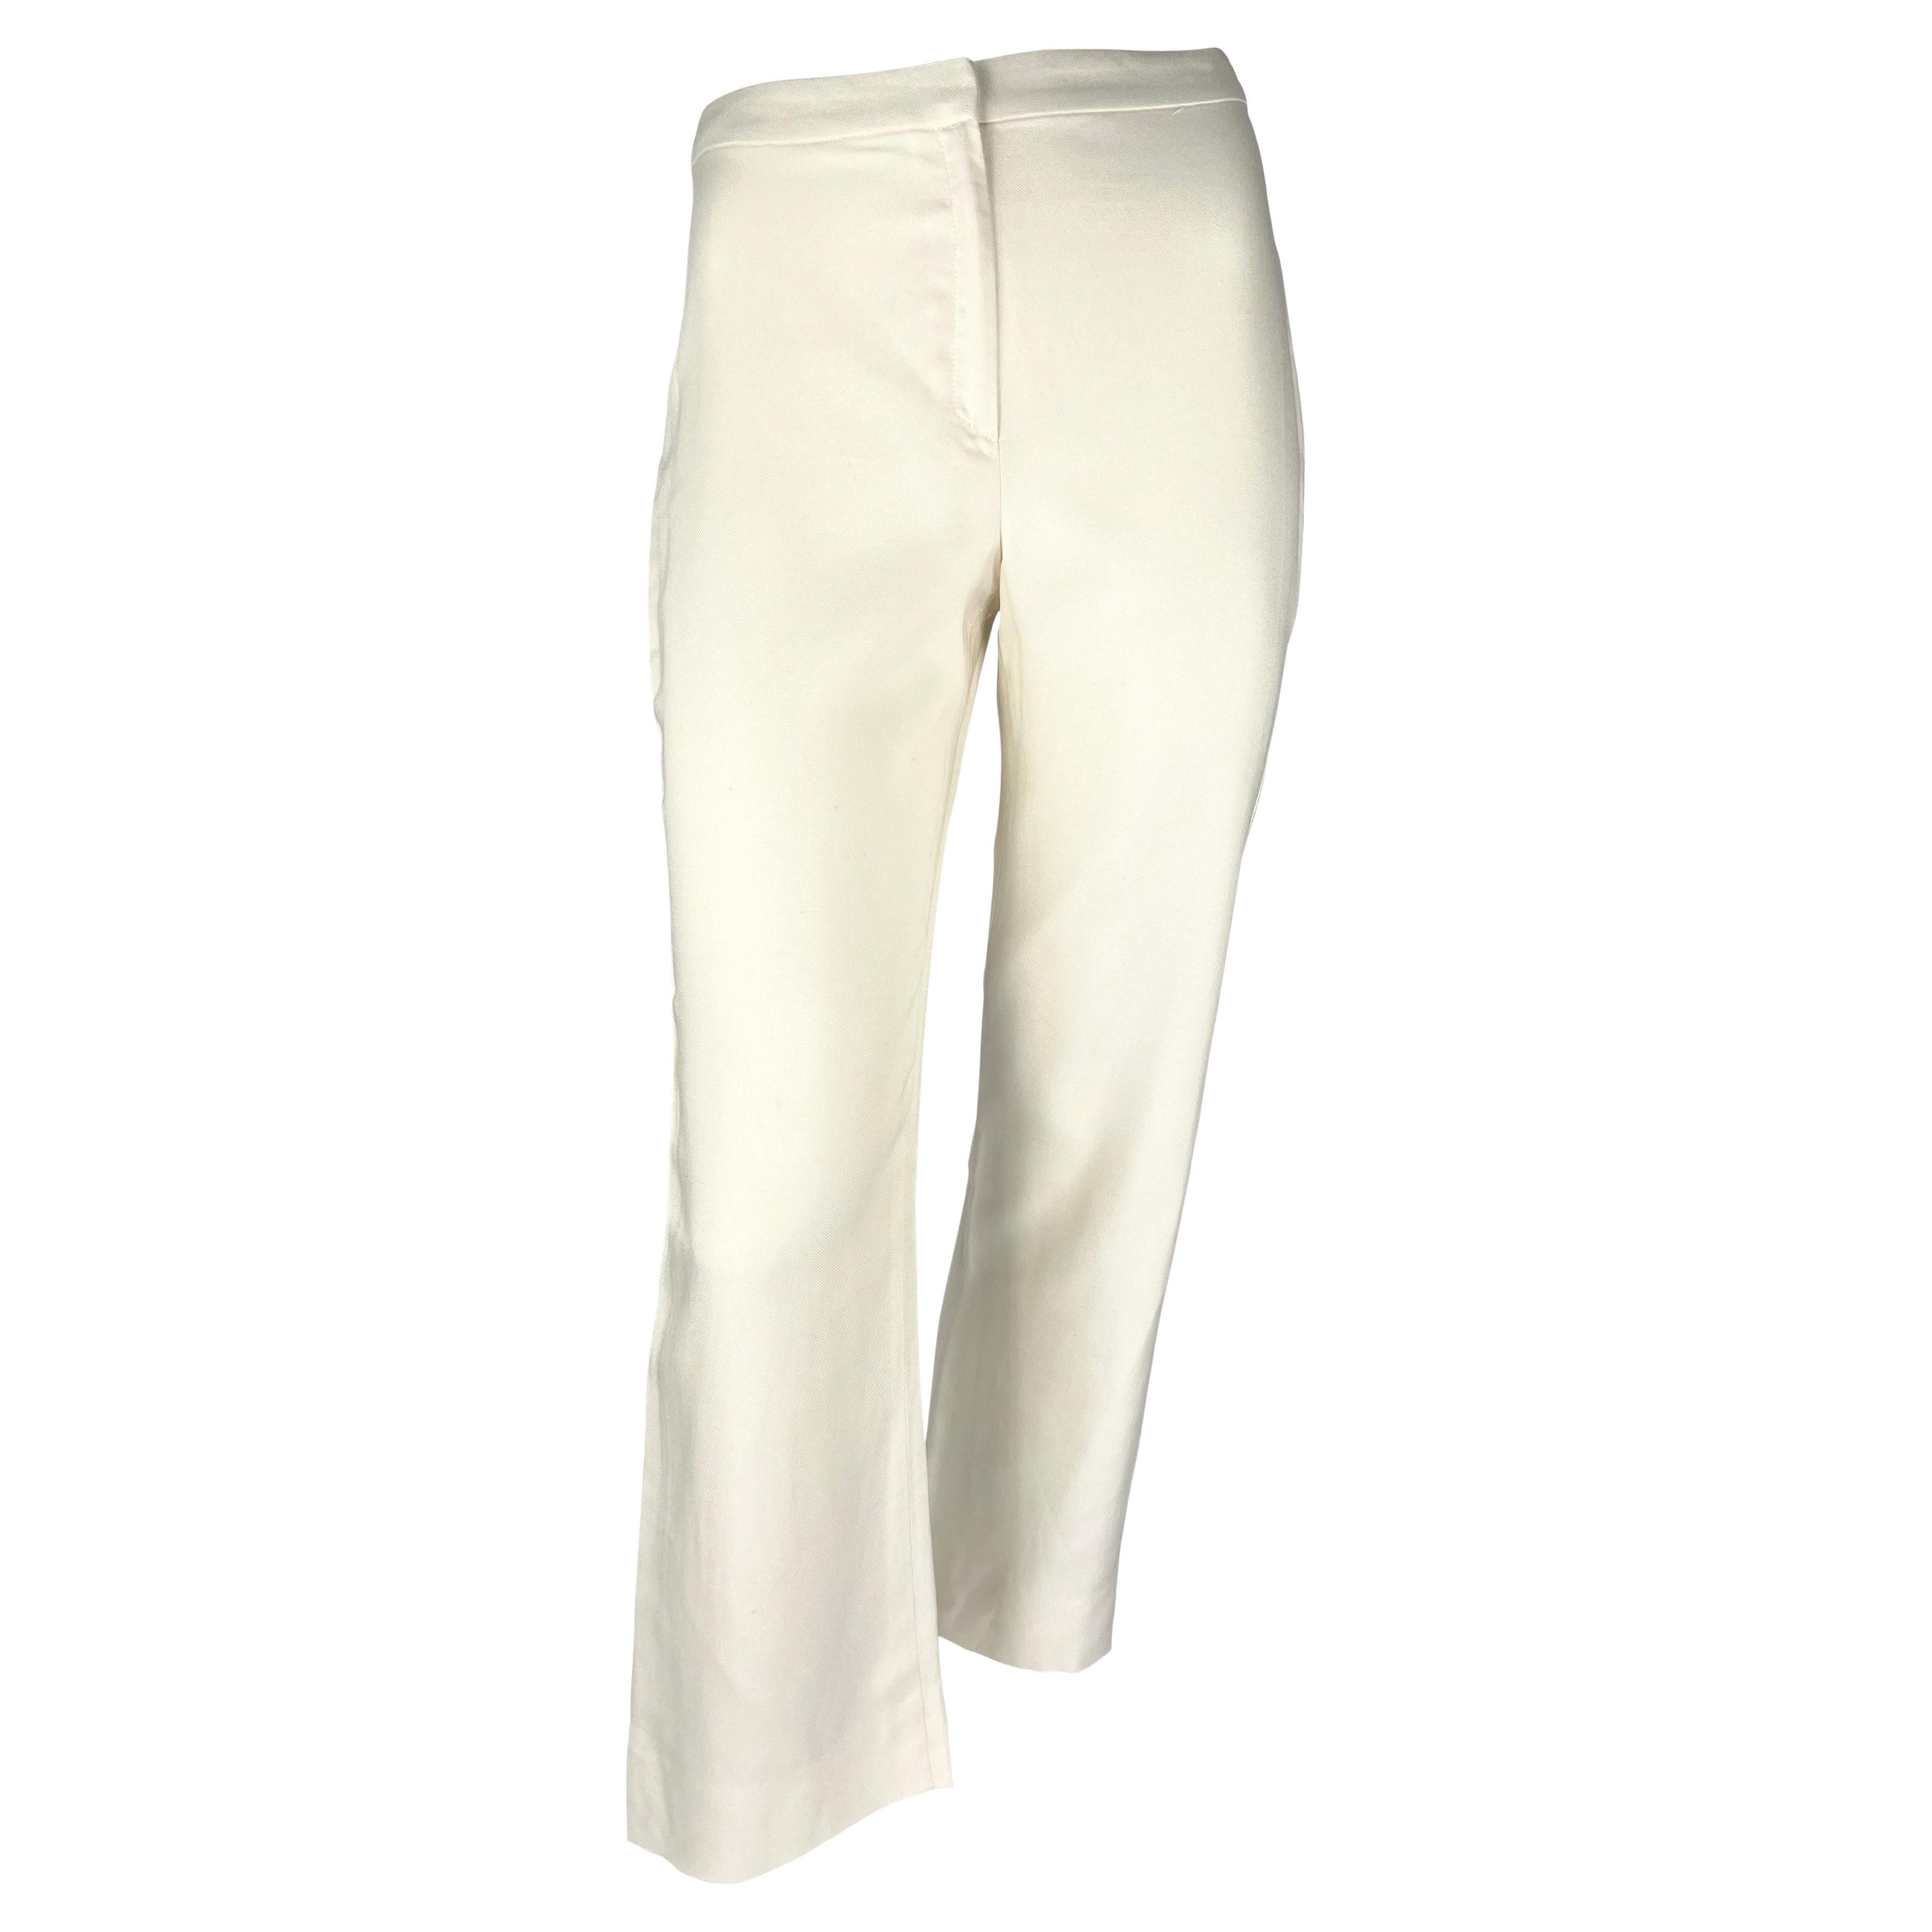 S/S 2000 Gianni Versace by Donatella Off-White Silk Tapered Pants For Sale